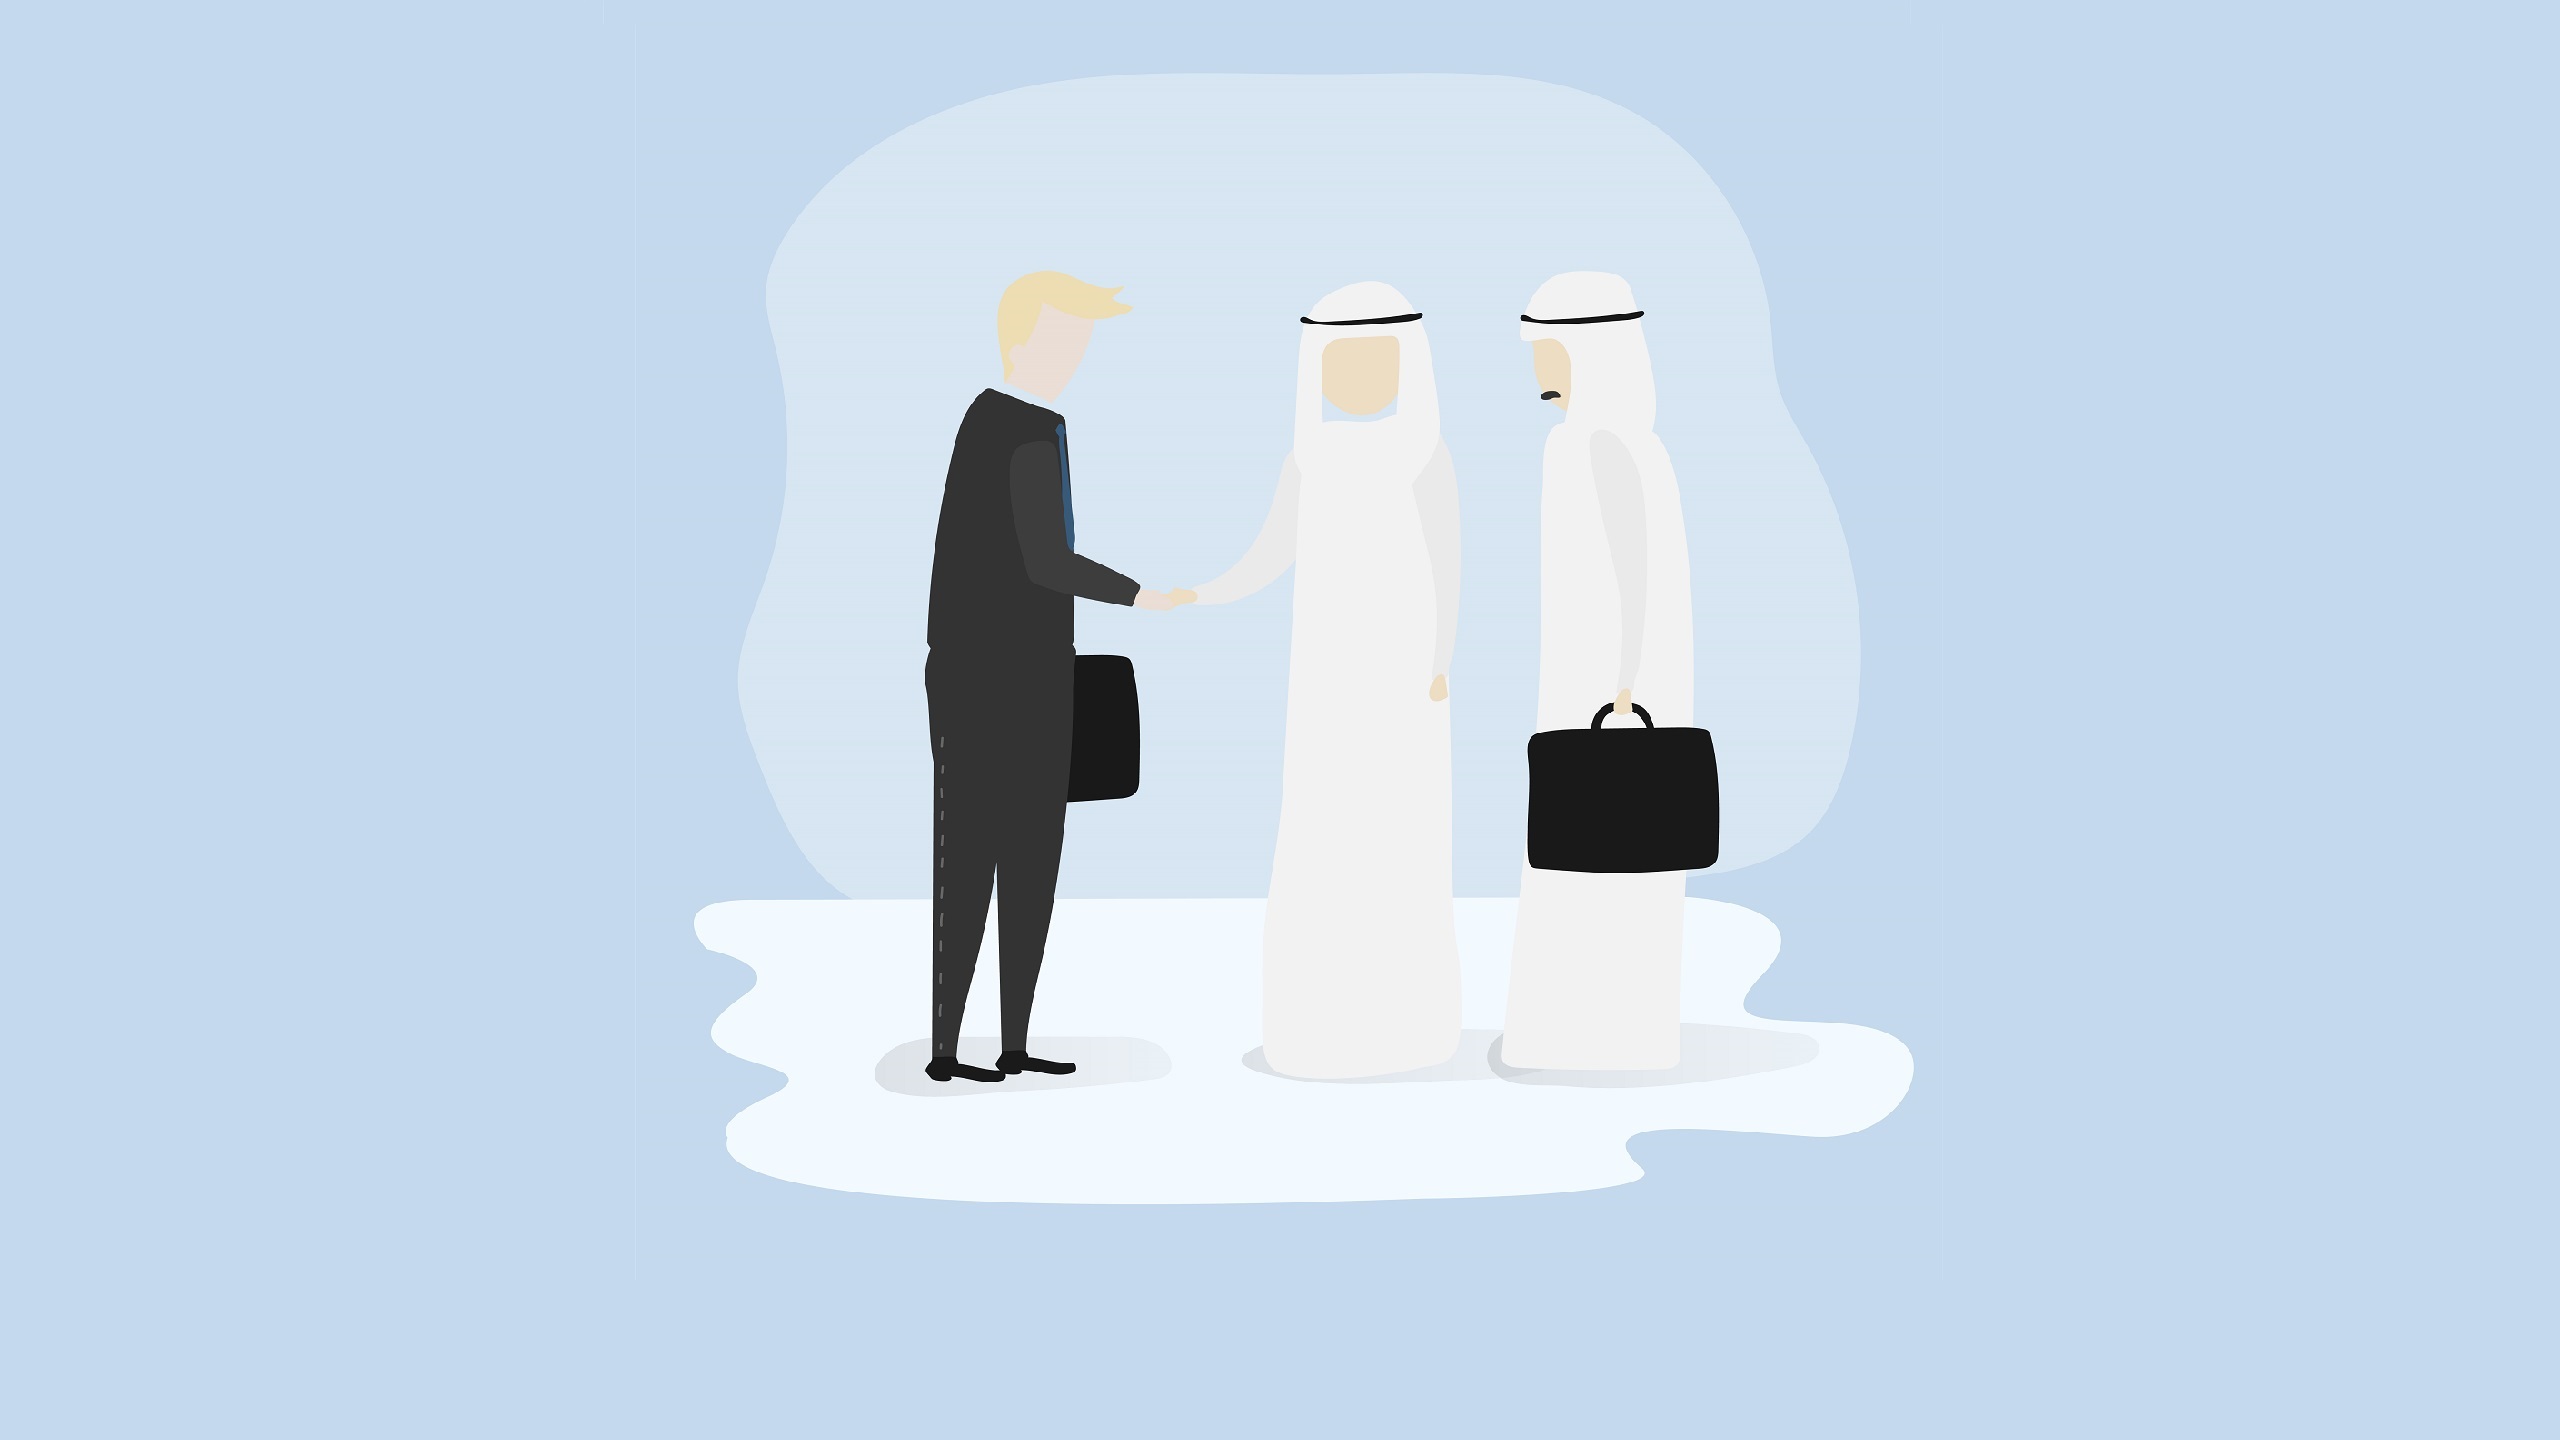 Practical Alternatives to Gulf Agreements